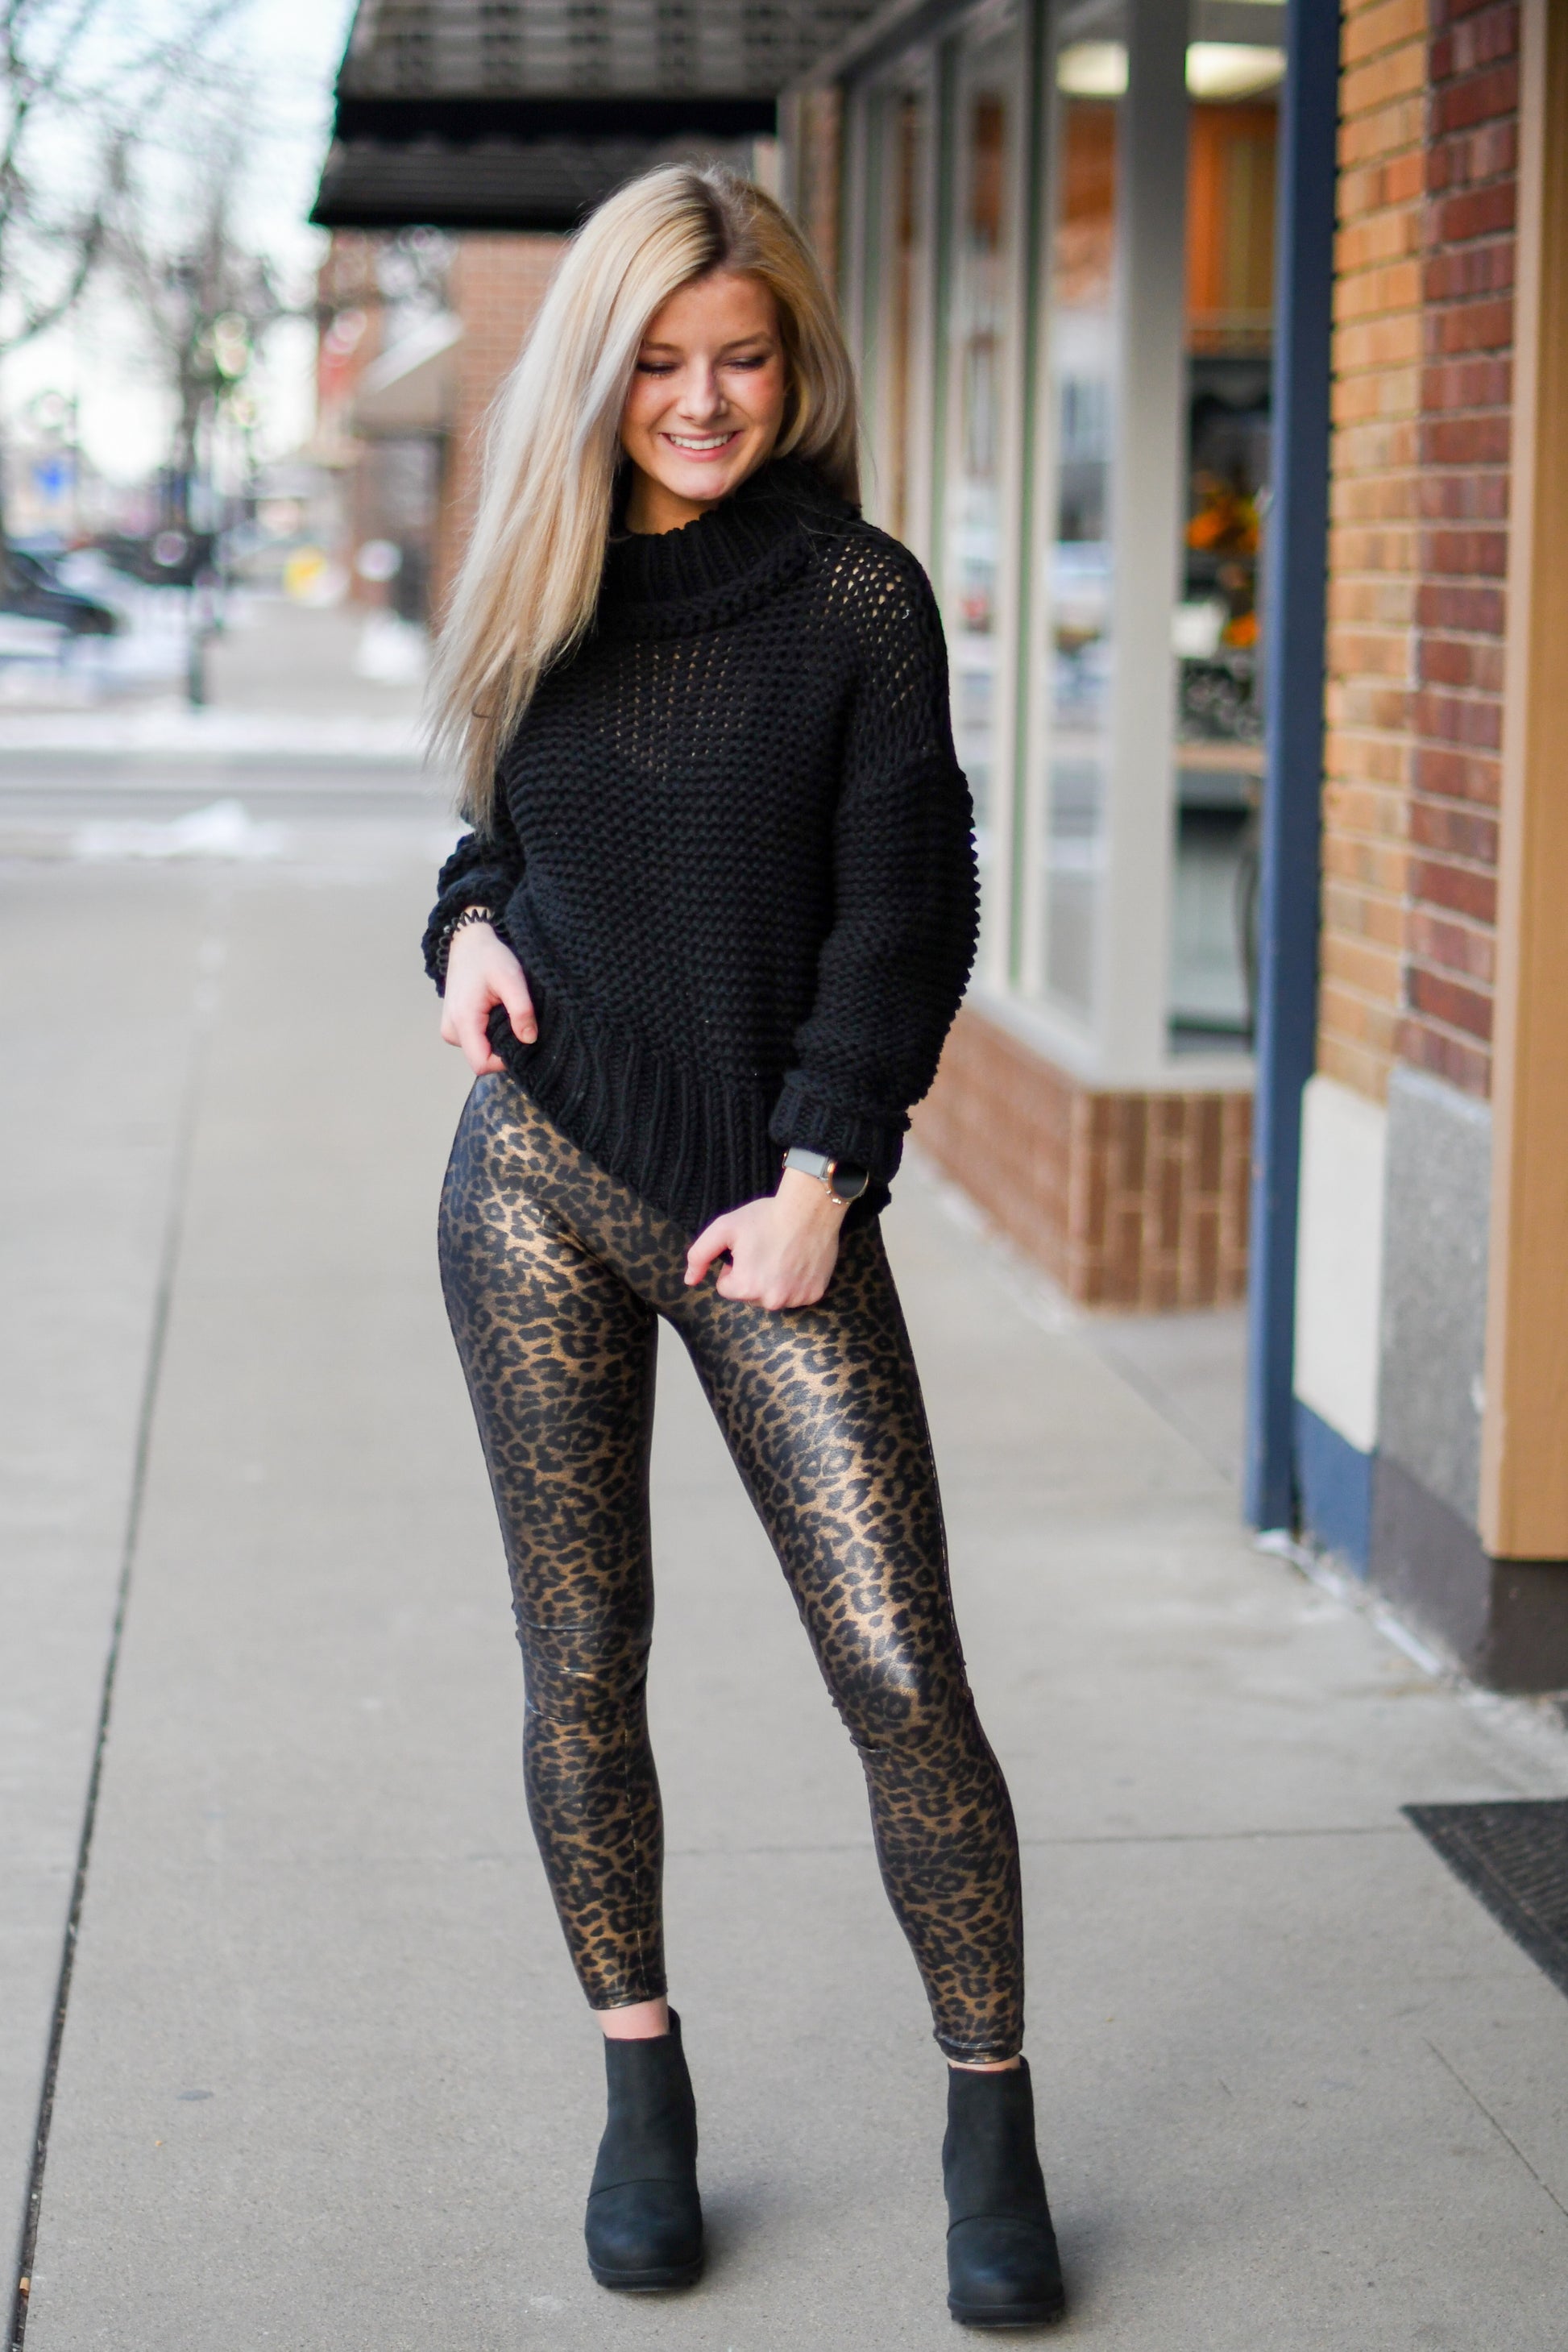 Gold Leopard Leggings Outfits (1 ideas & outfits)